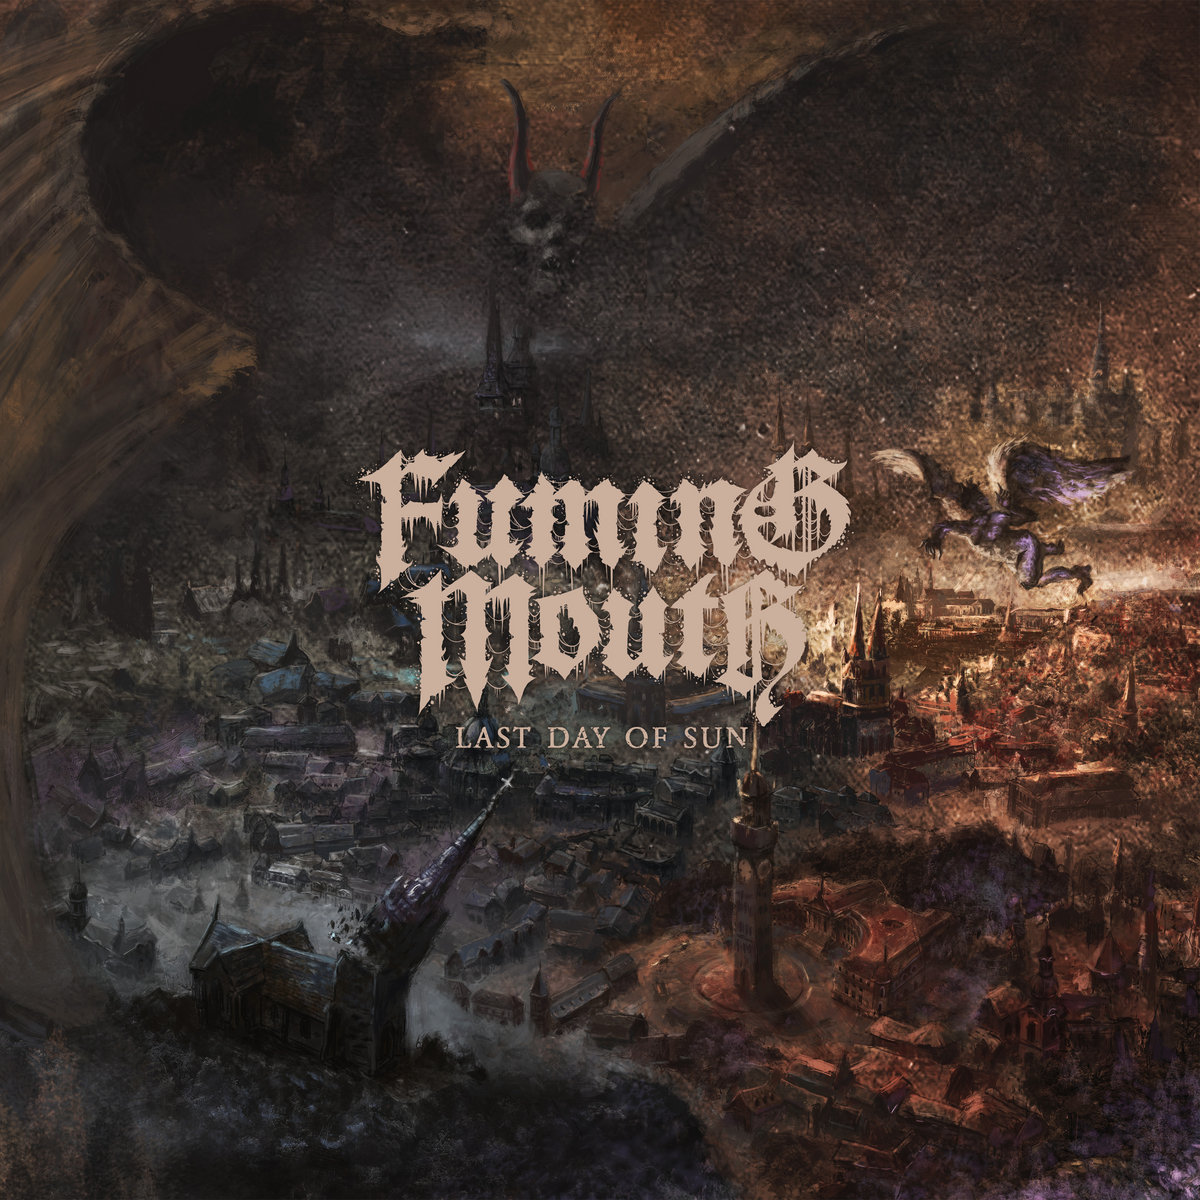 Rage Against the Dying of the Light | “The Silence Beyond Life” by Fuming Mouth